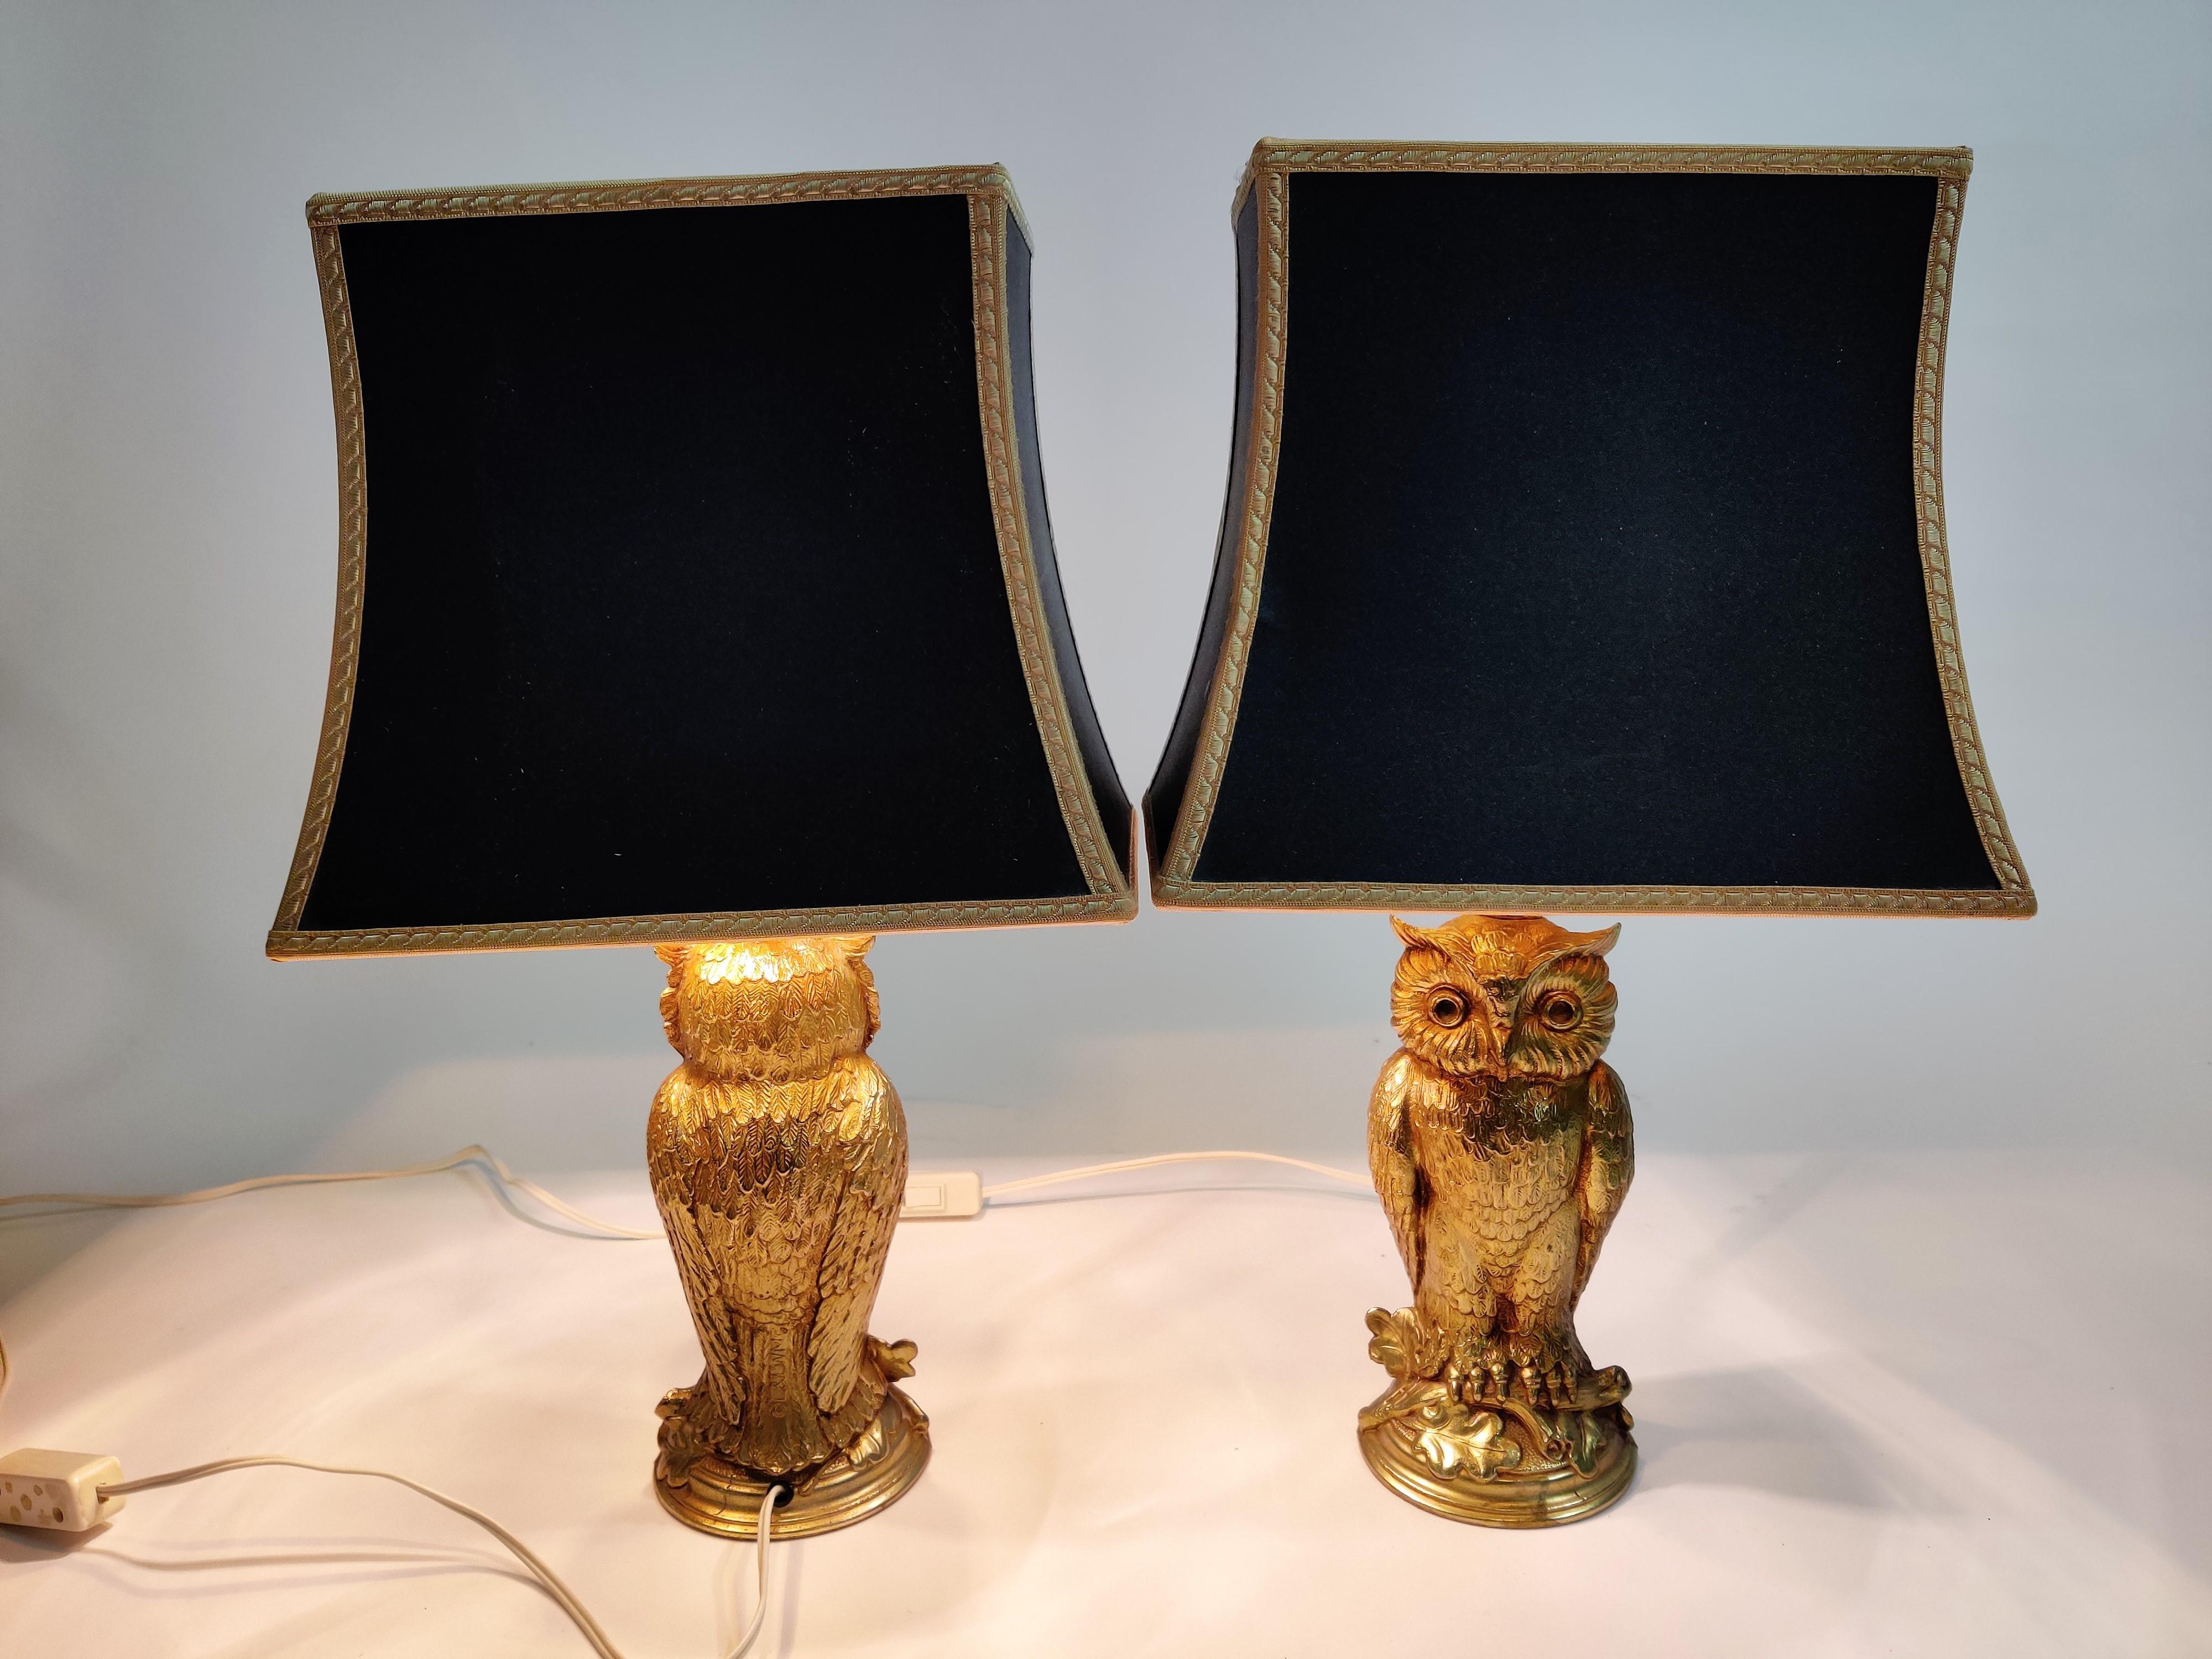 Pair of charming sculptural brass owl lamps made by Loevsky & Loevsky and sold by Deknudt lighting company.

The lamps are tested, work with a regular E27 light bulb and come with their original lamp shades.

Loevsky & Loevsky produced these